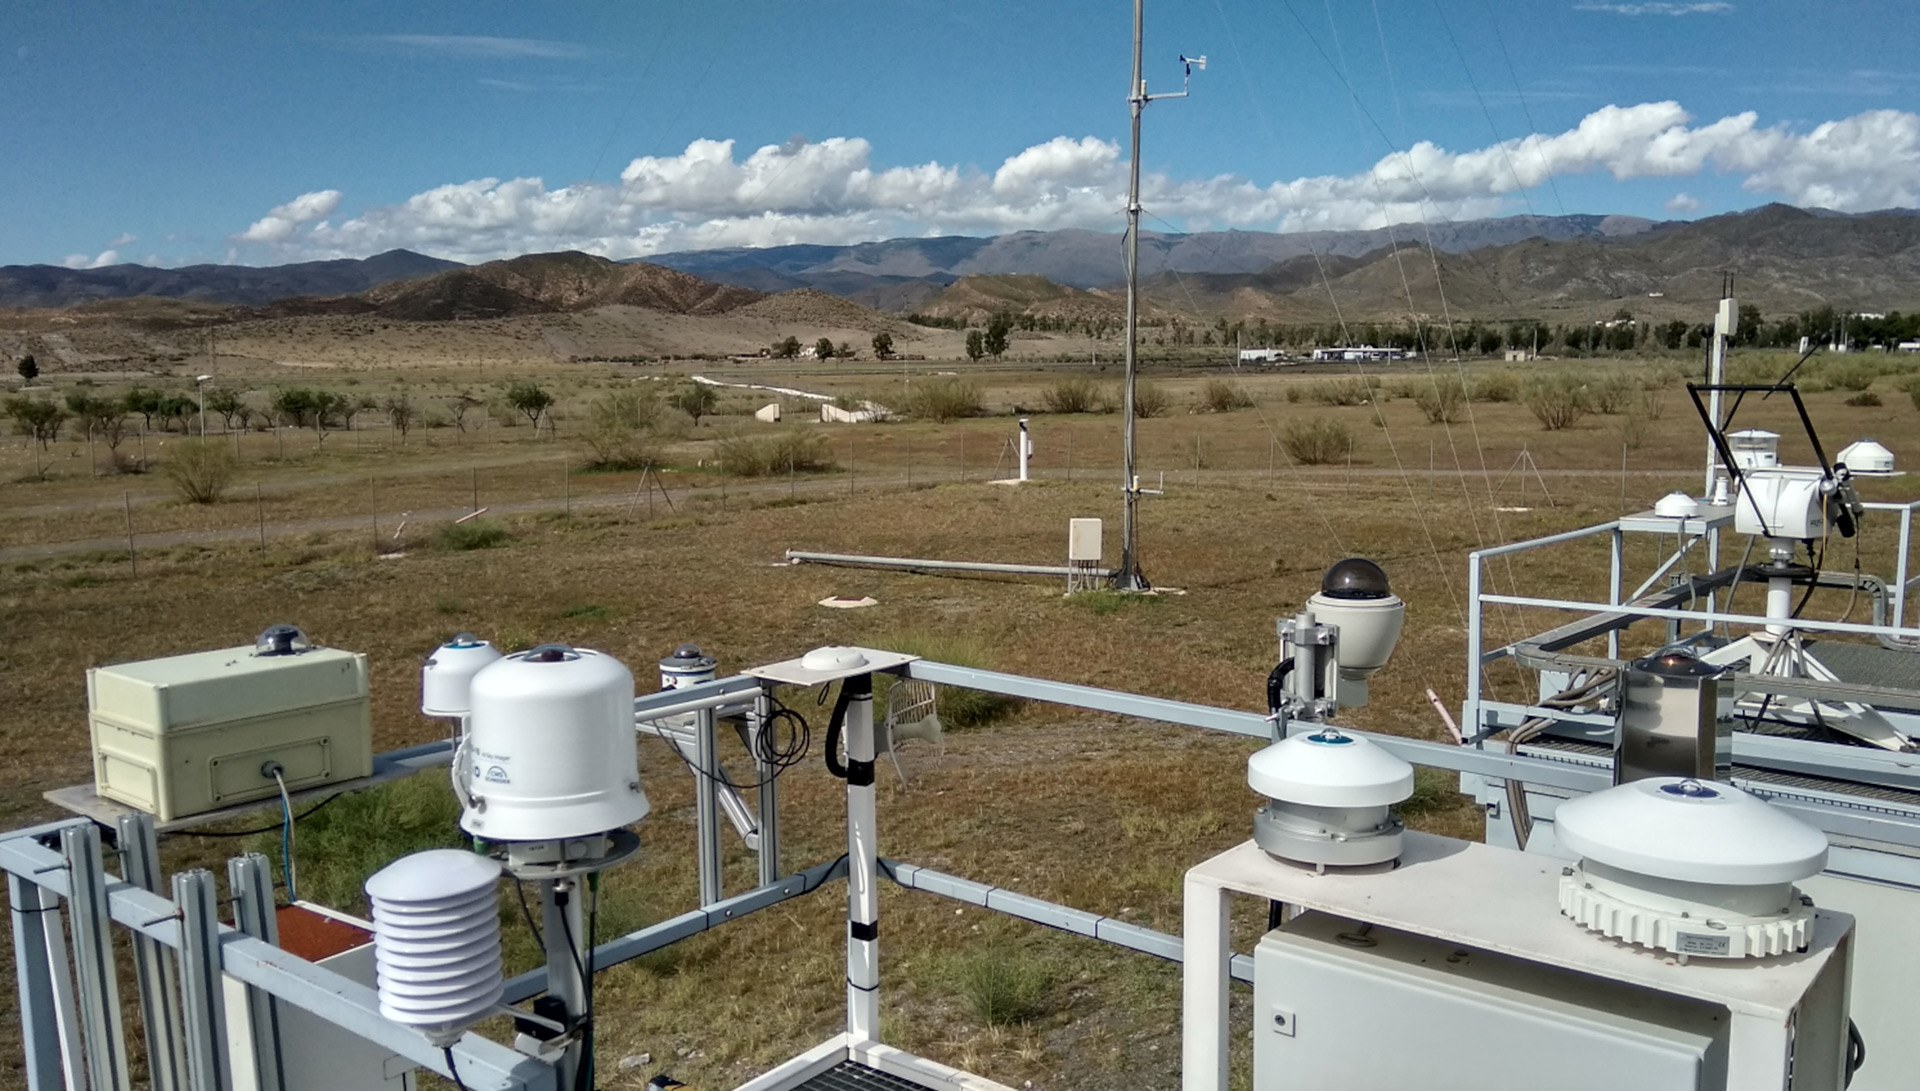 Meteorological measurement station METAS at Plataforma Solar de Almería, owned by the Spanish research centre CIEMAT